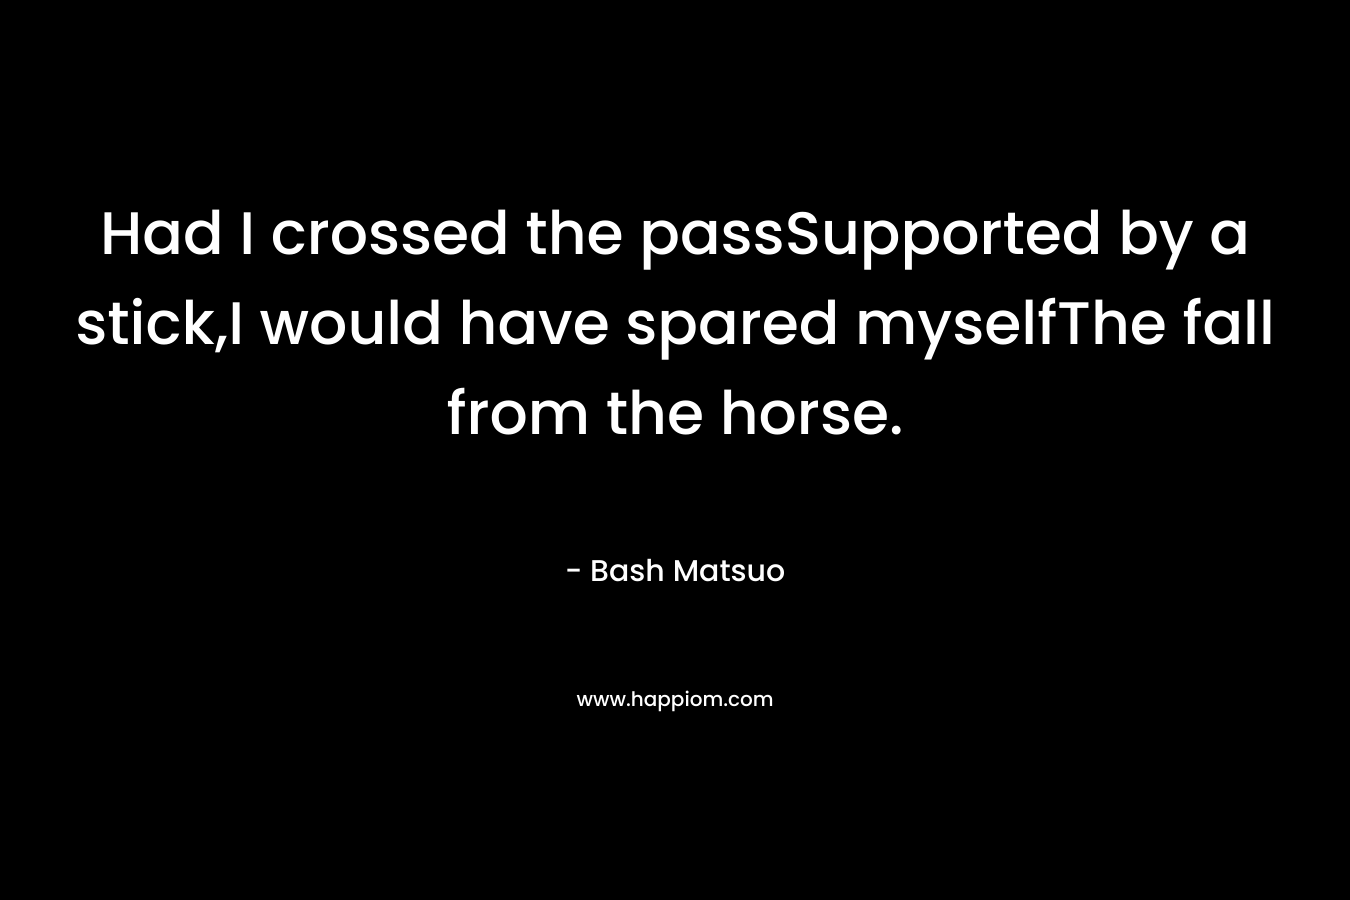 Had I crossed the passSupported by a stick,I would have spared myselfThe fall from the horse.